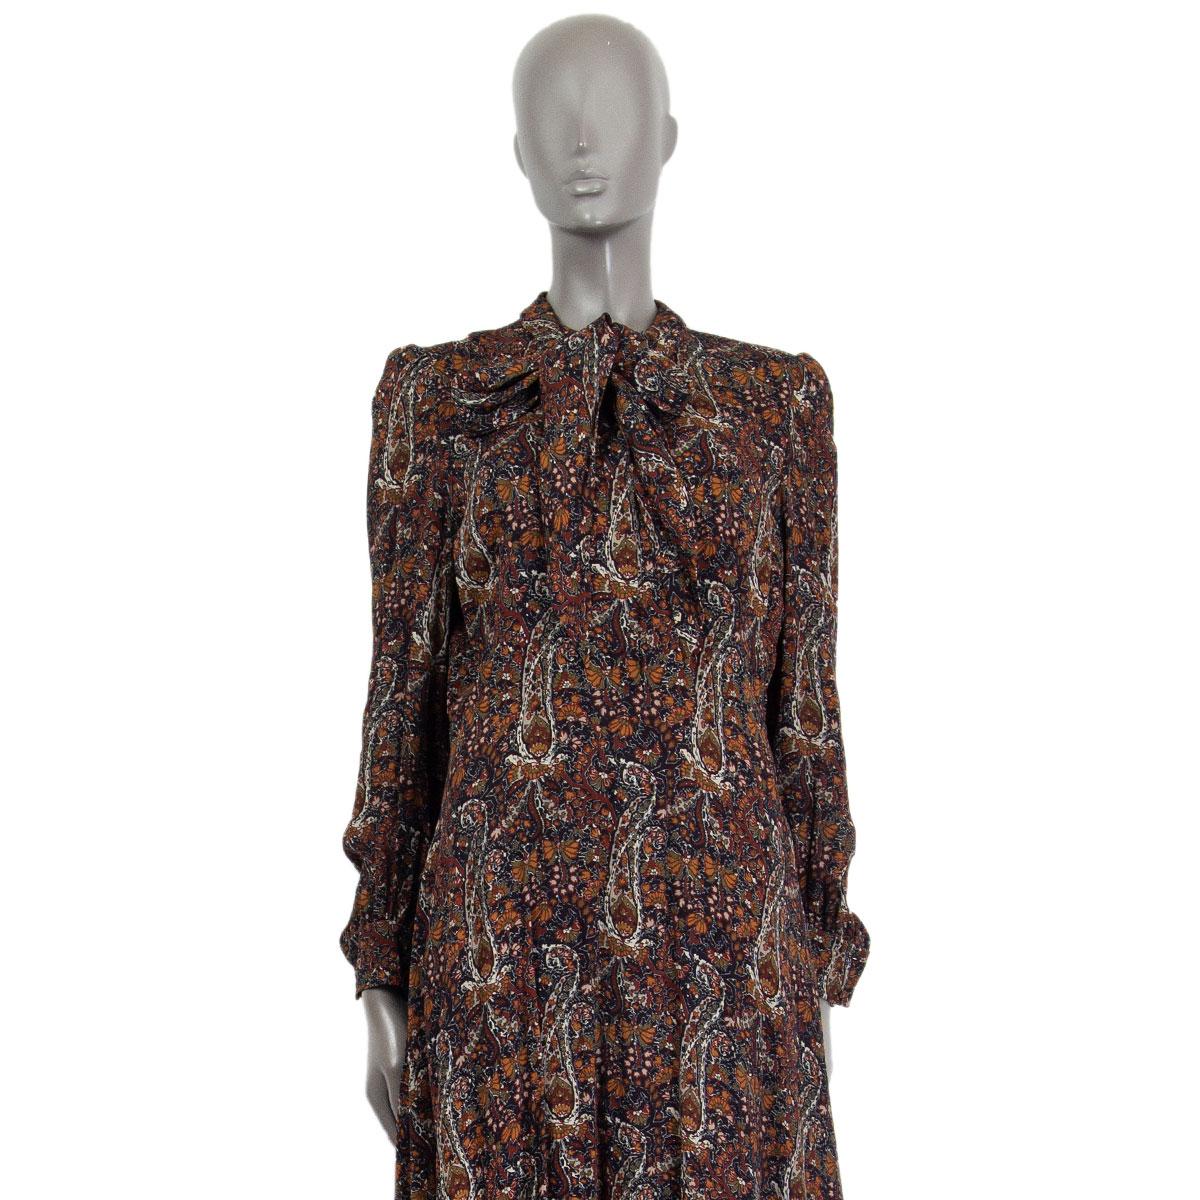 Saint Laurent lavallière-neck midi dress in multi-color viscose (100%) with a handkerchief hem, long sleeves and buttoned cuffs. Closes on the front with buttons and fastens on the side with a concealed zipper. Lined in silk (100%). Has been worn